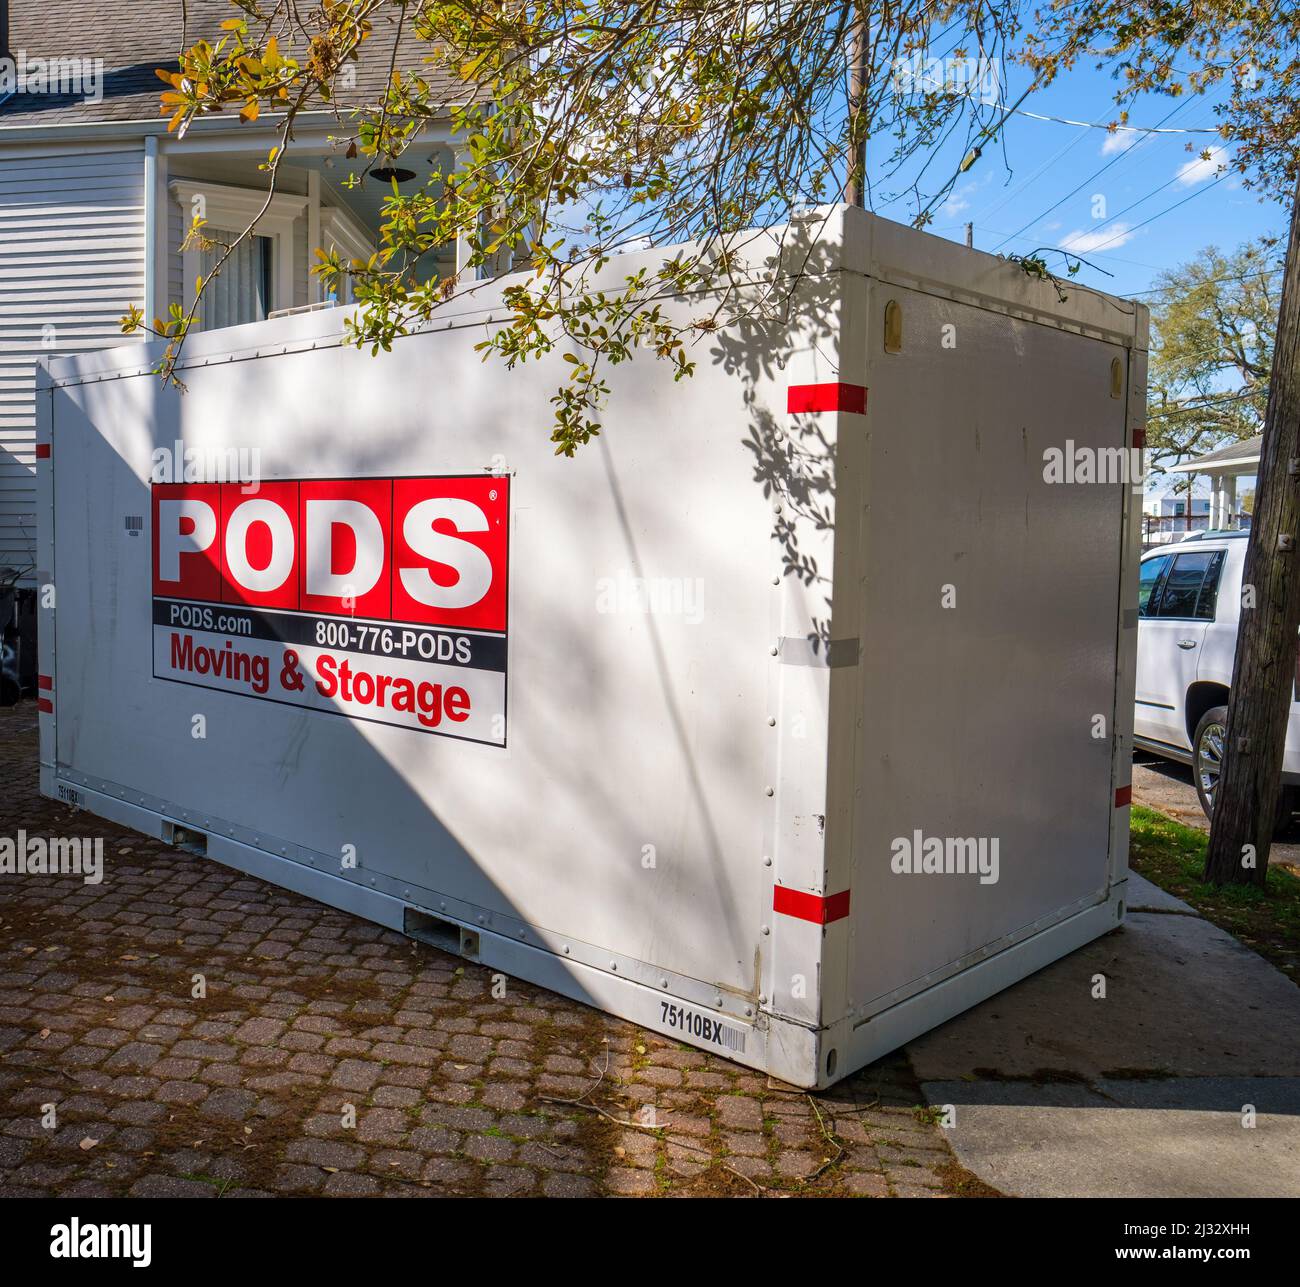 NEW ORLEANS, LA, USA - MARCH 24, 2022: Pods Moving and Storage container in driveway of Uptown New Orleans home Stock Photo